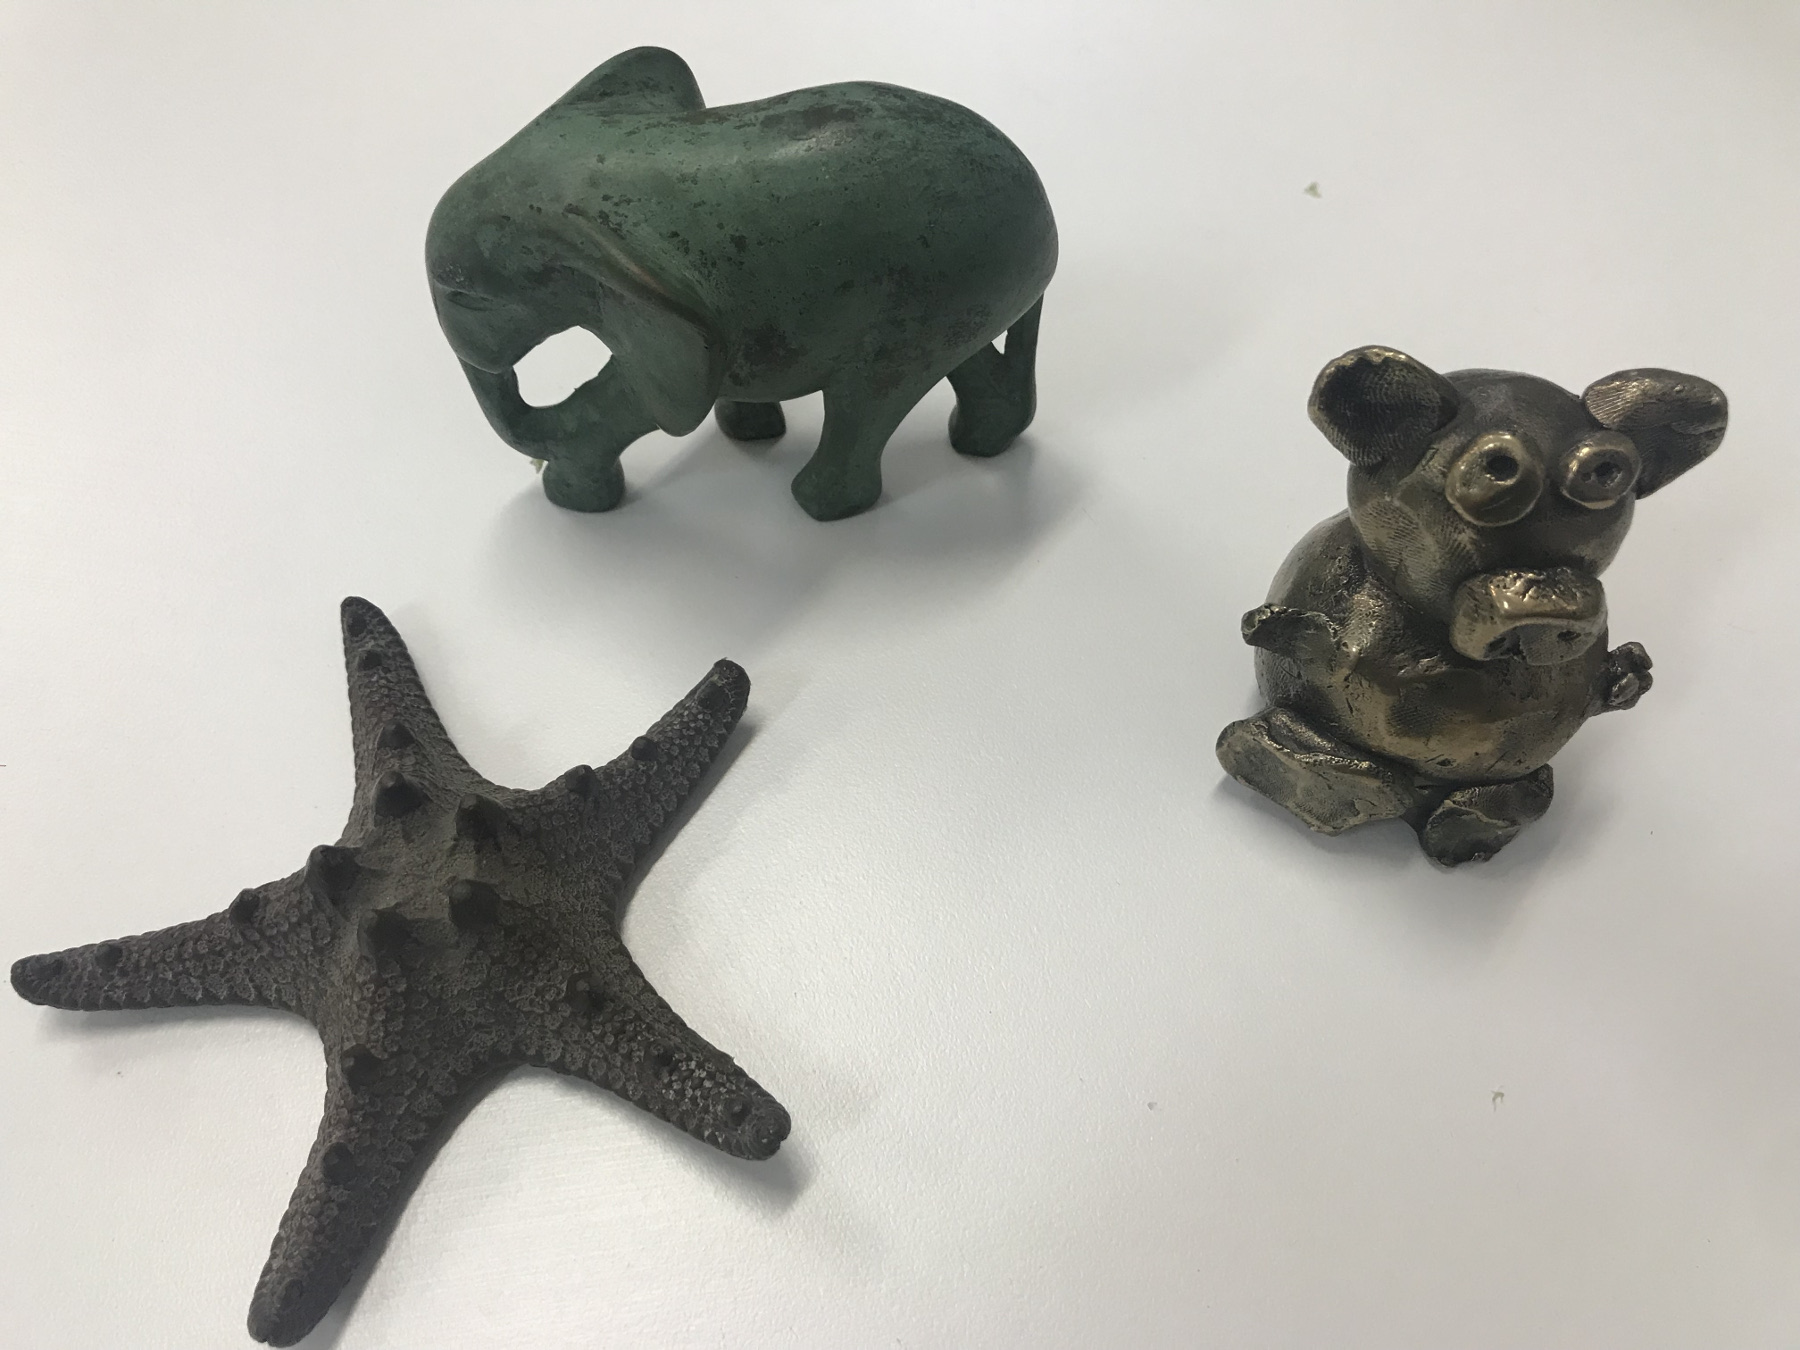 Bronze examples of small sculptures